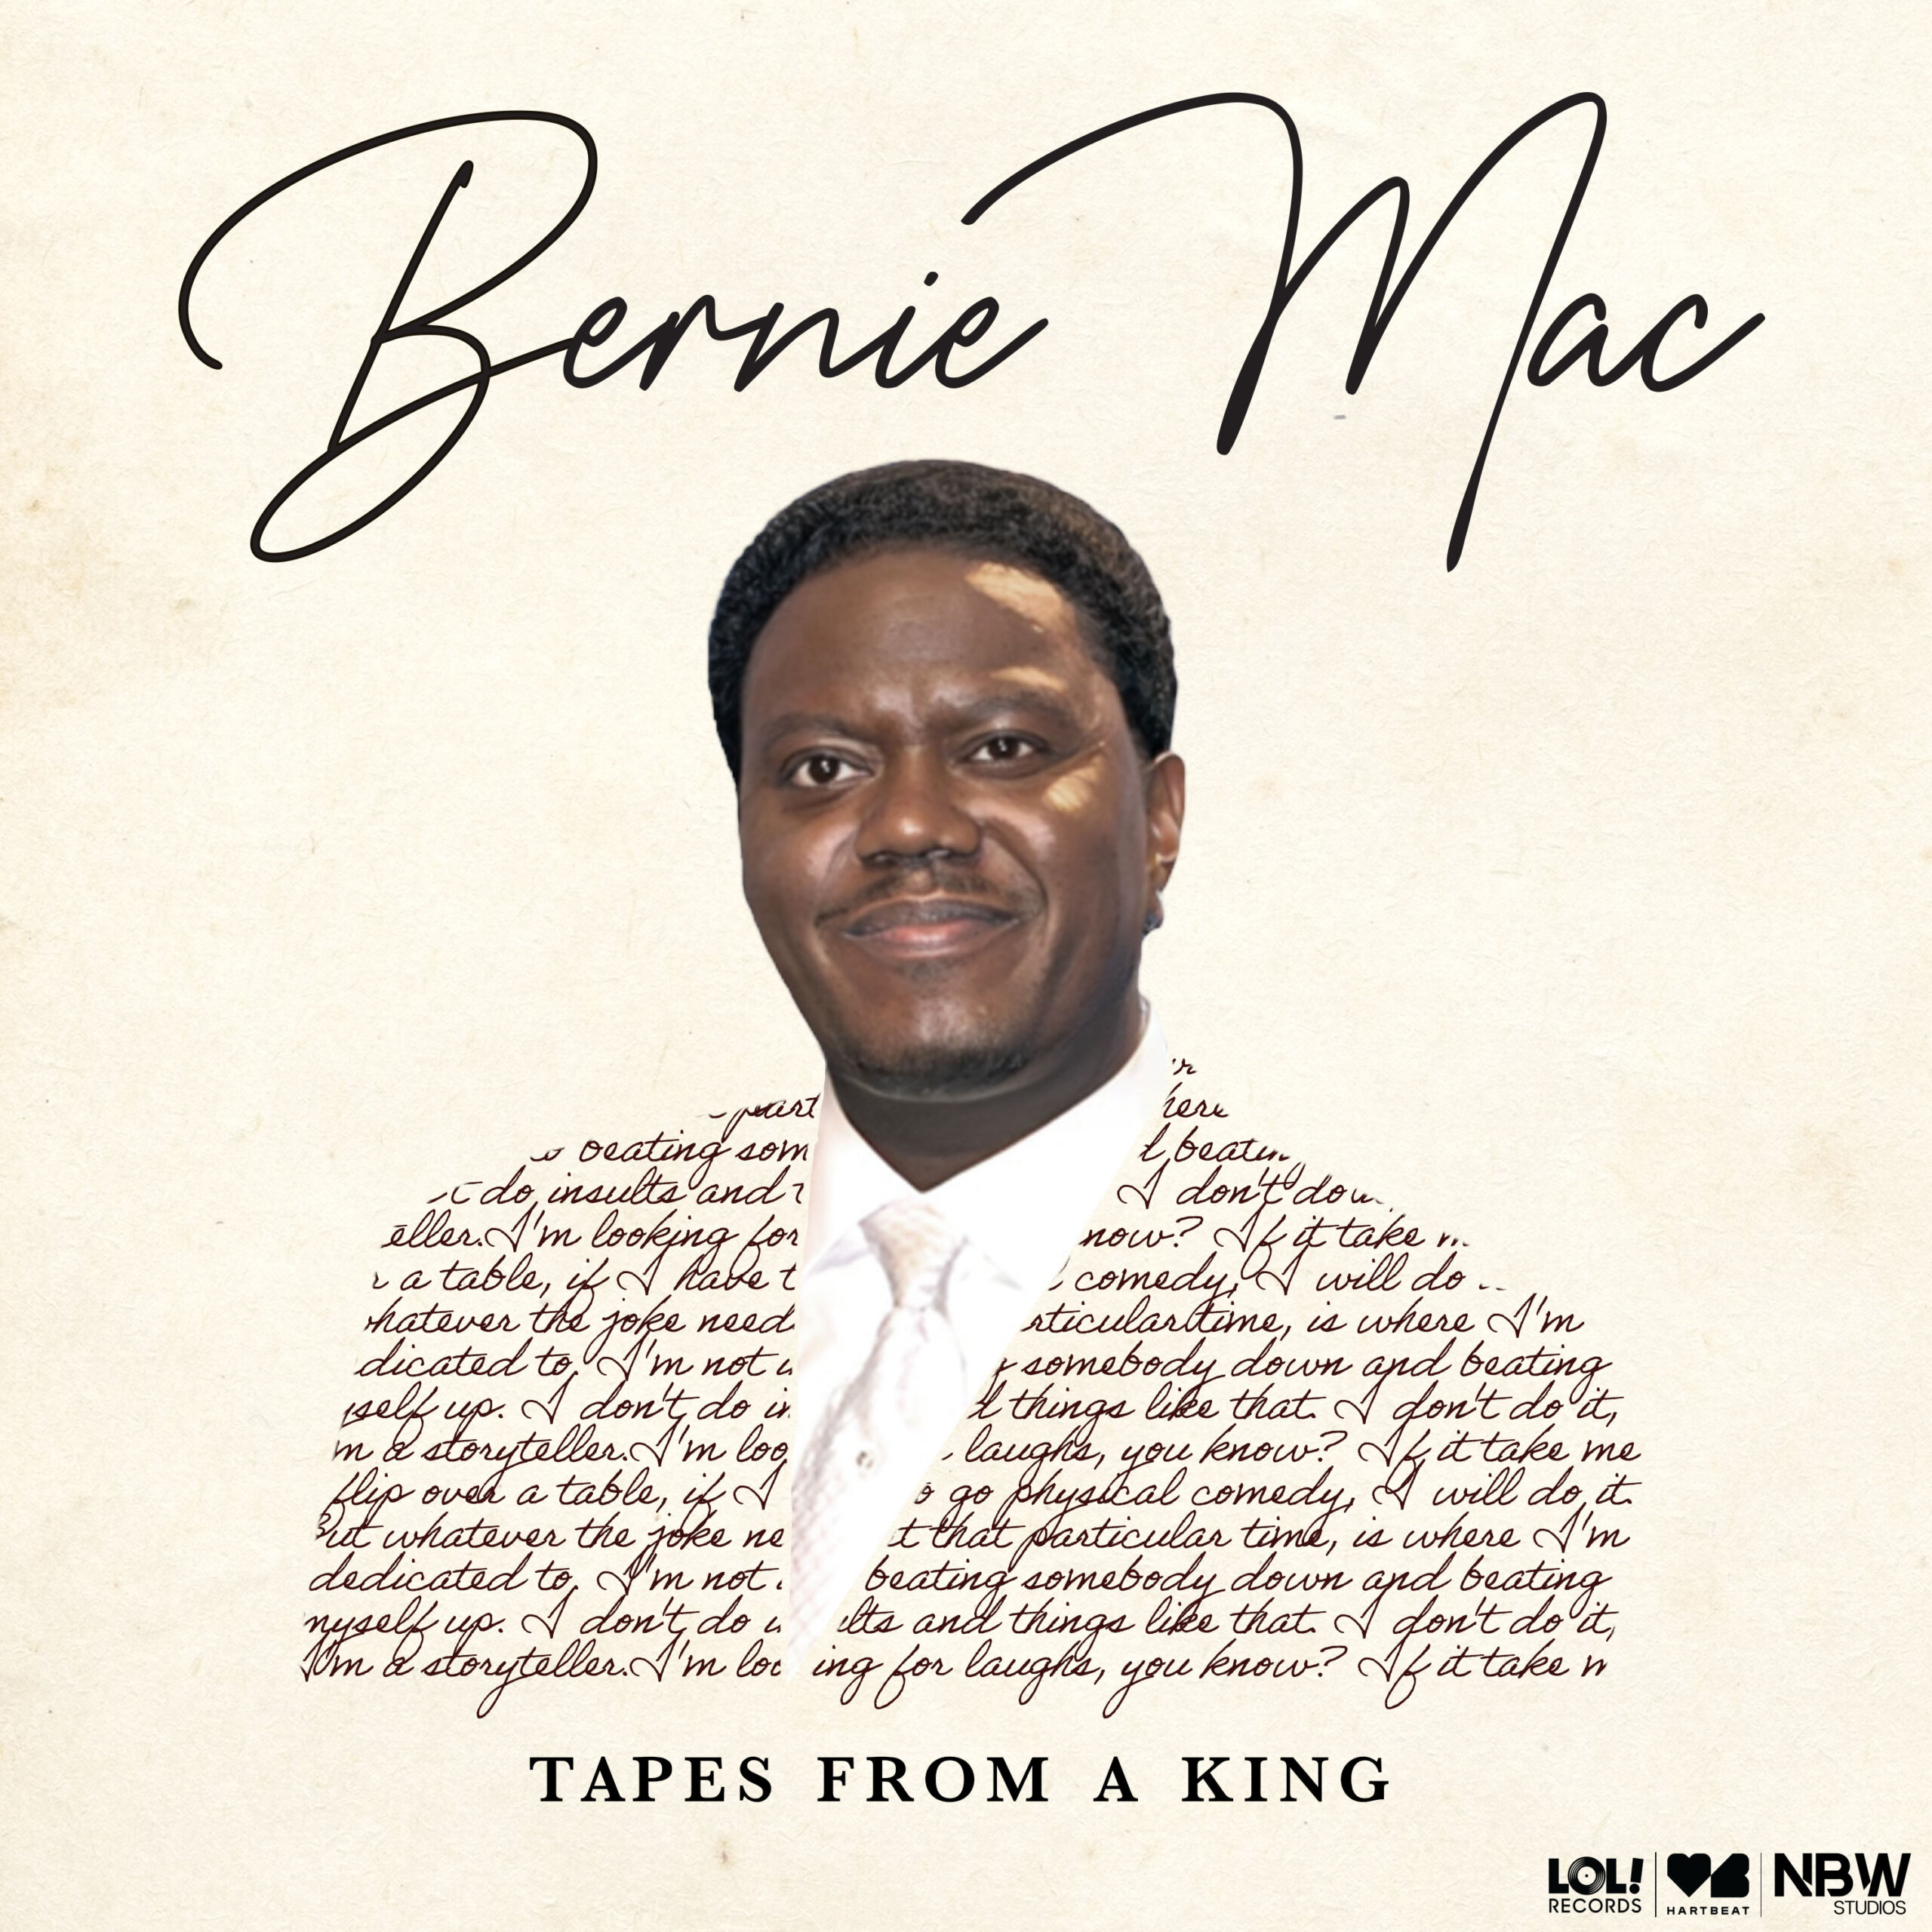 Comedy Special, “Bernie Mac: Tapes From A King”, To Be Released Today